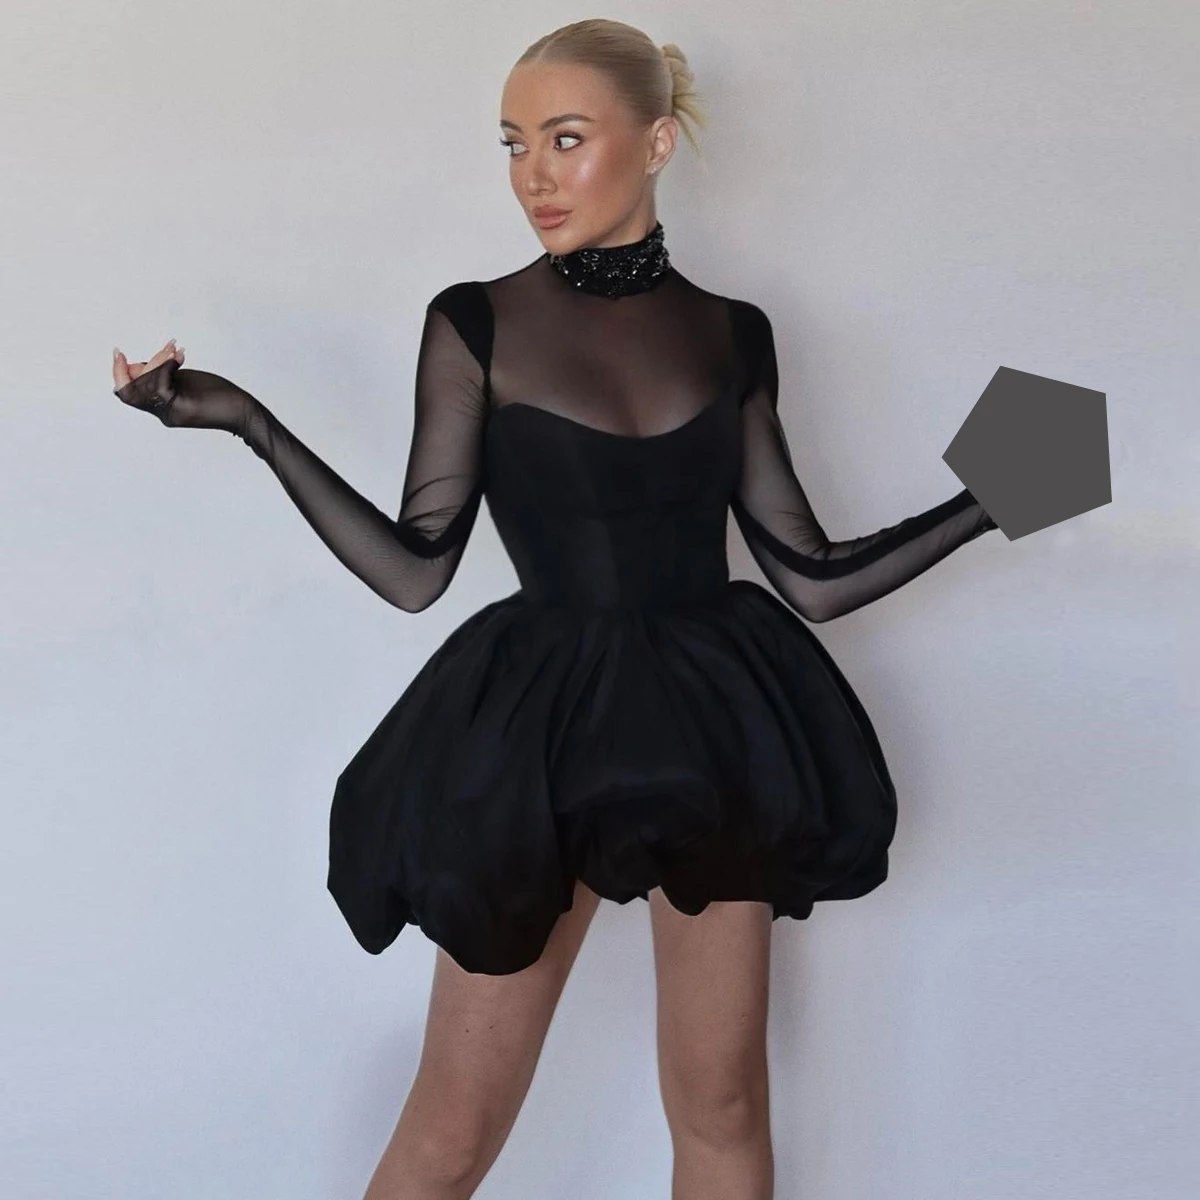 

Sexy Black Short Prom Party Dresses Sheer Stretch Tulle Long Sleeve Women Cocktail Gown Mini Special Occasion Dress Bubble Skirt